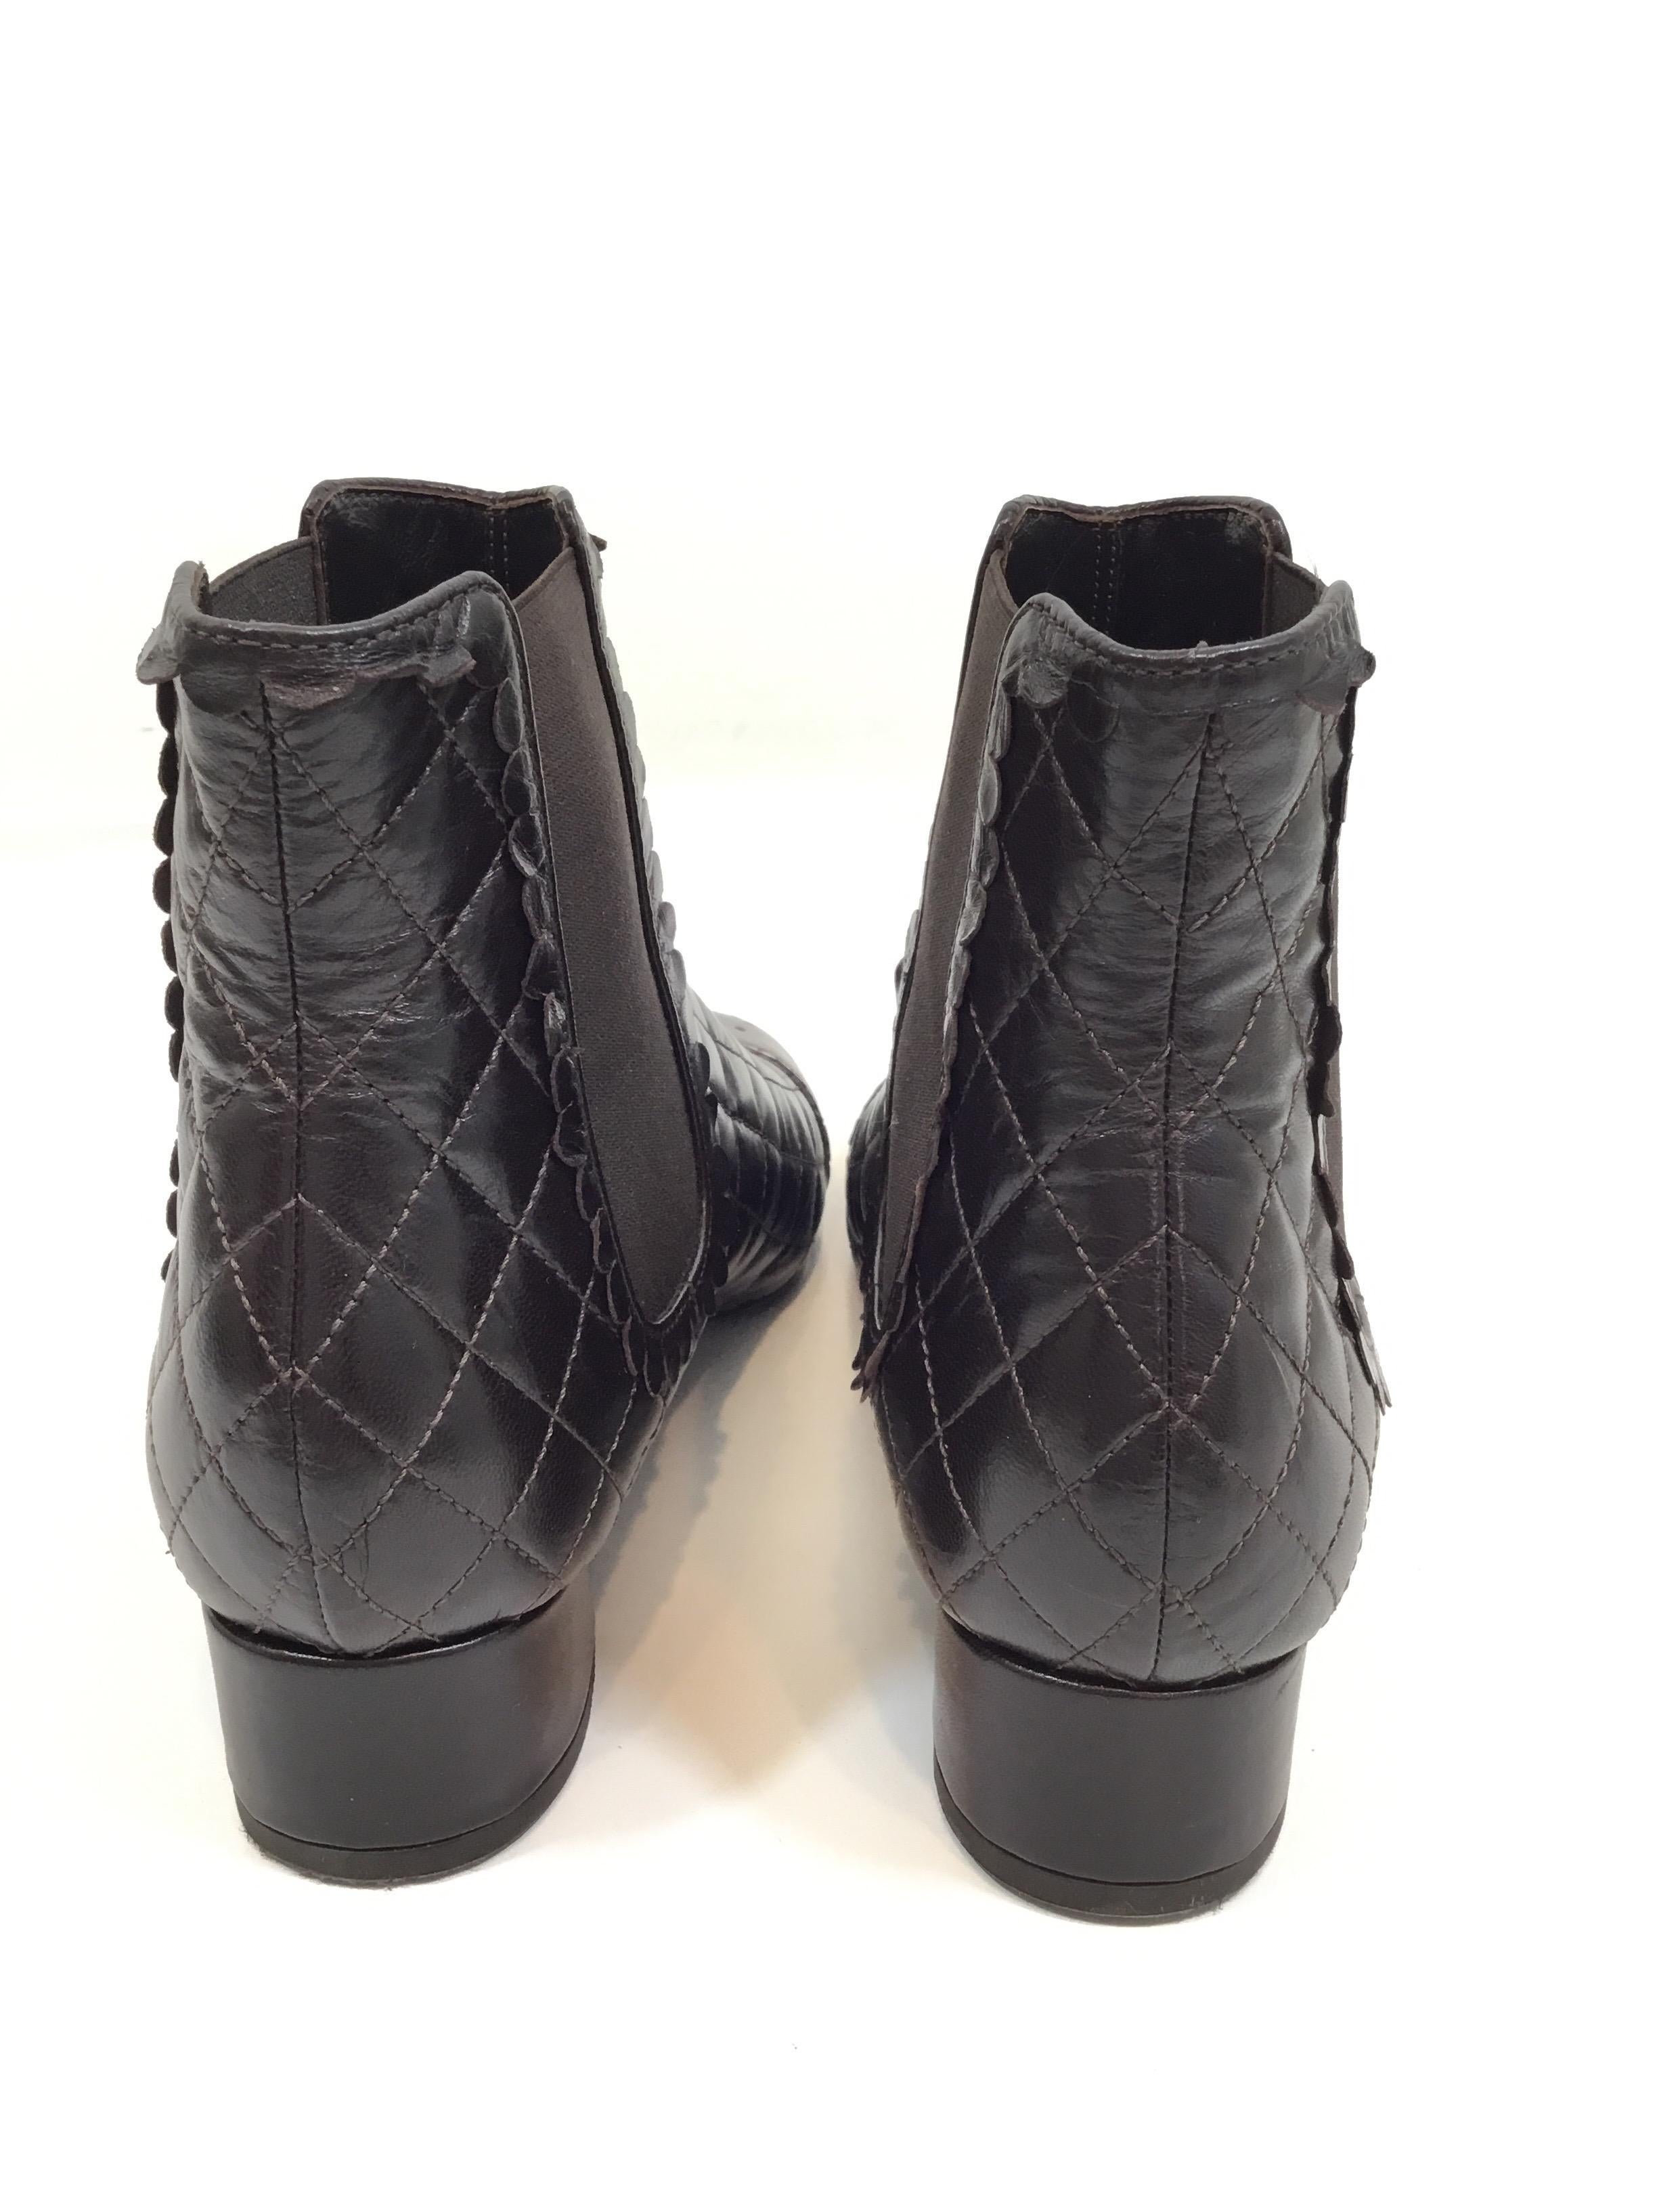 Chanel Quilted Leather Booties, 38 In Excellent Condition In Carmel, CA